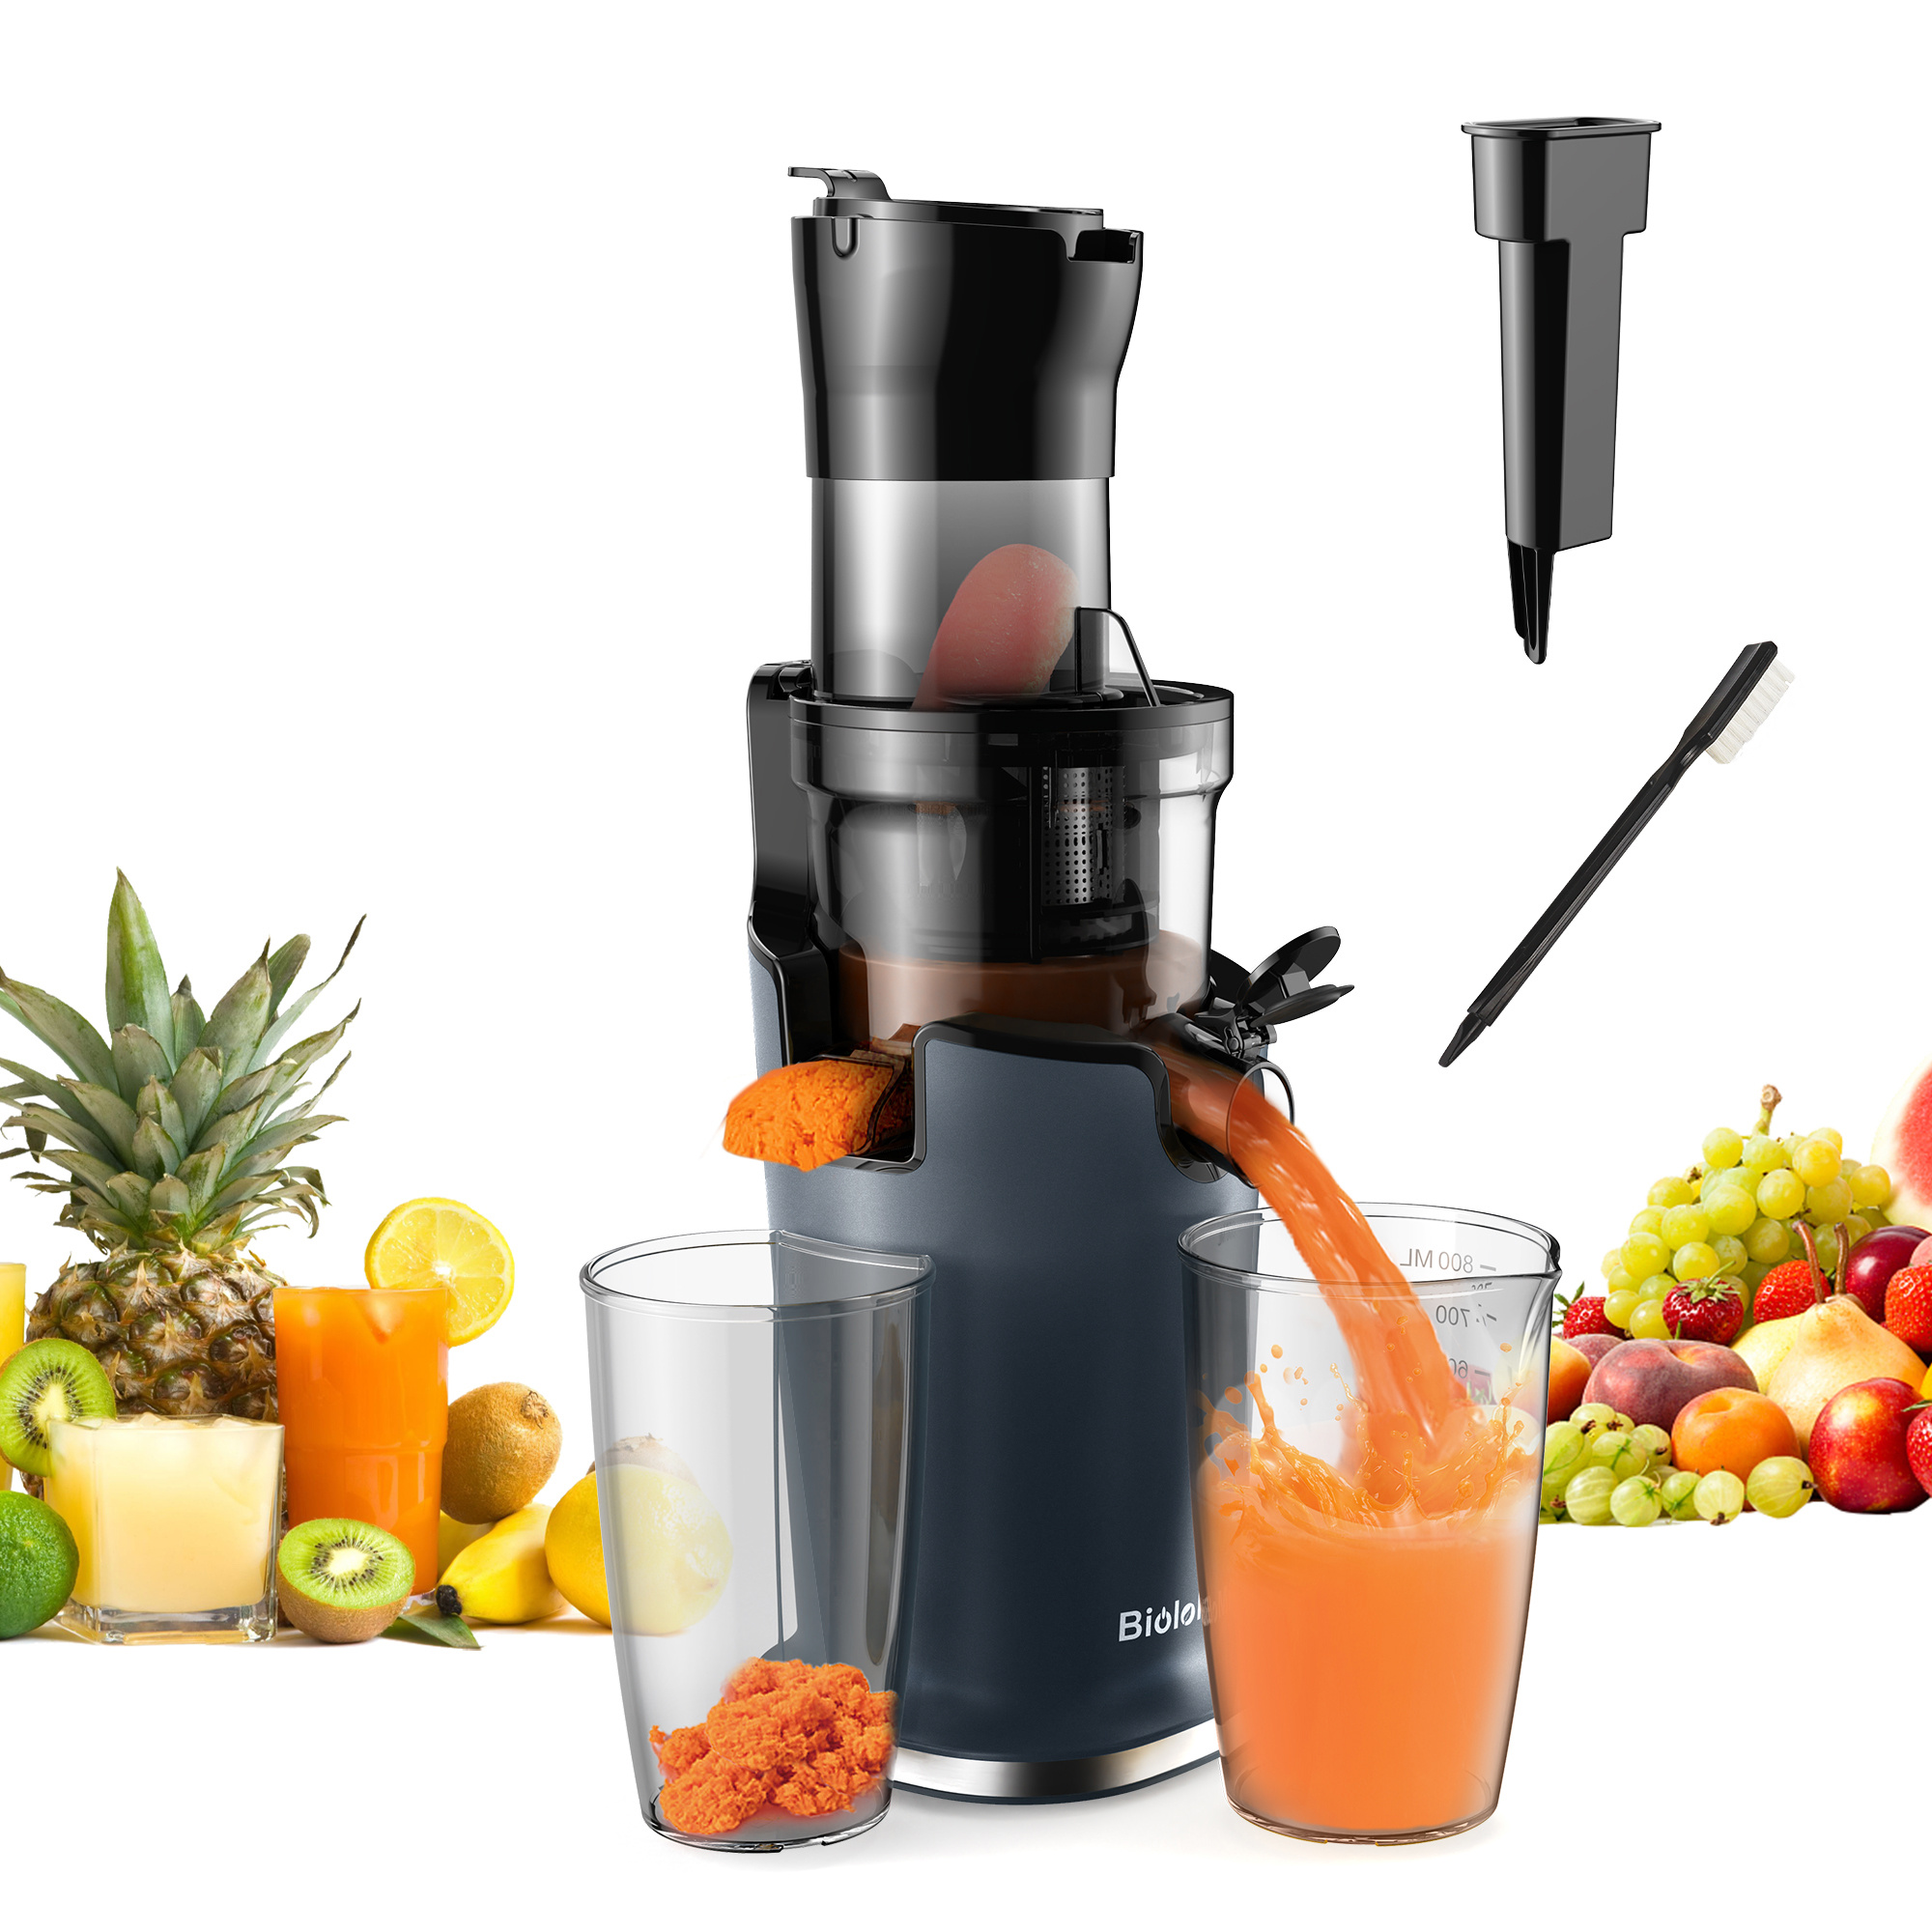 biolomix 200w cold press juicer with 3 07in feed chute tritan material slow juicer machines heavy duty masticating juice extractor fits whole fruits veggies easy to clean details 0